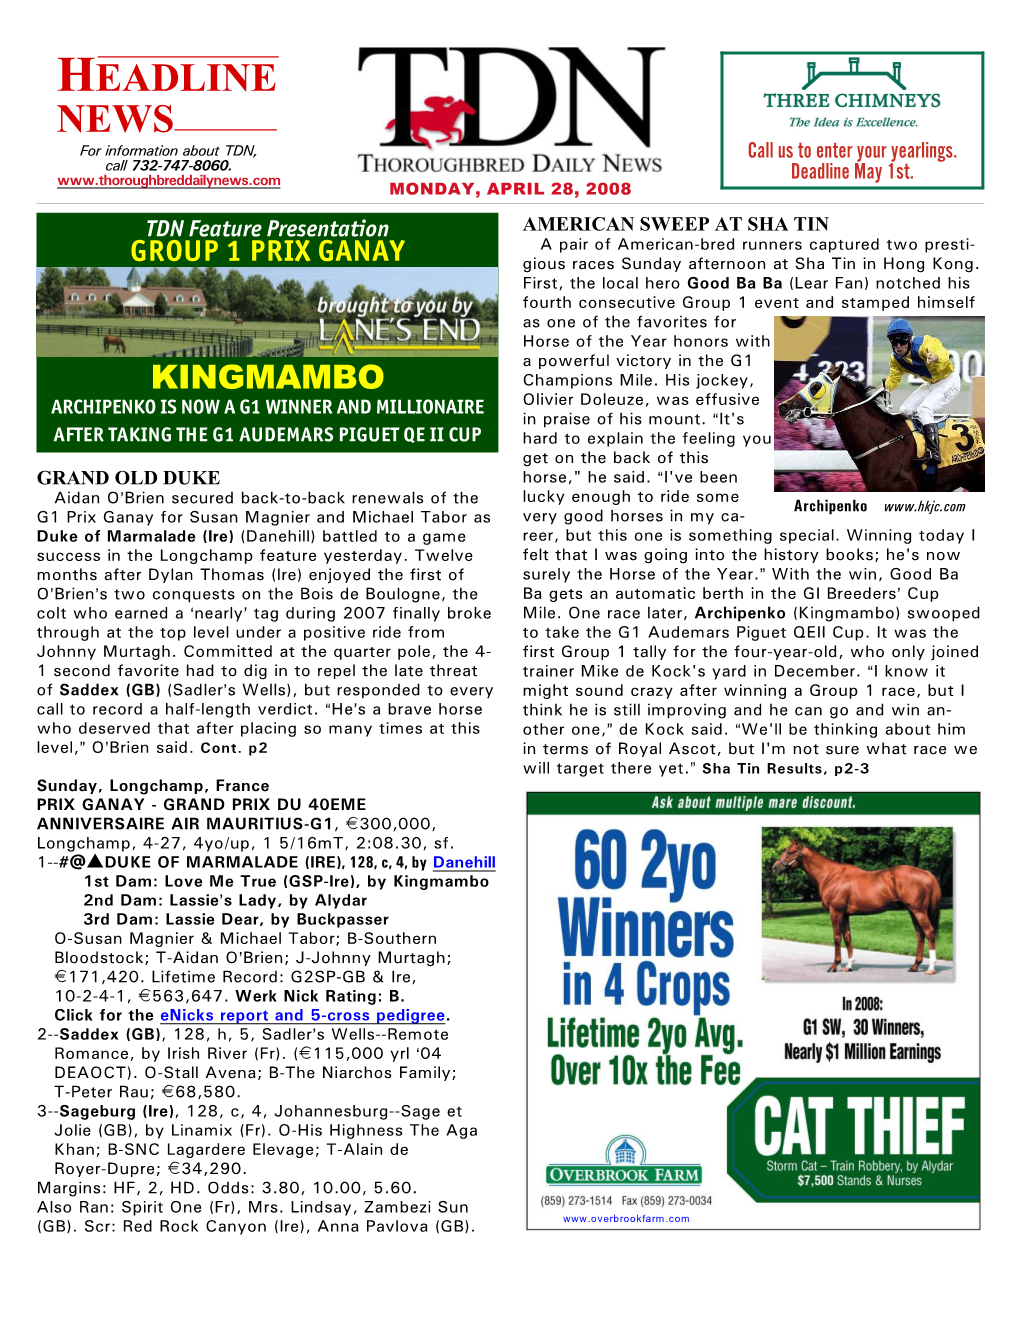 HEADLINE NEWS for Information About TDN, Call Us to Enter Your Yearlings